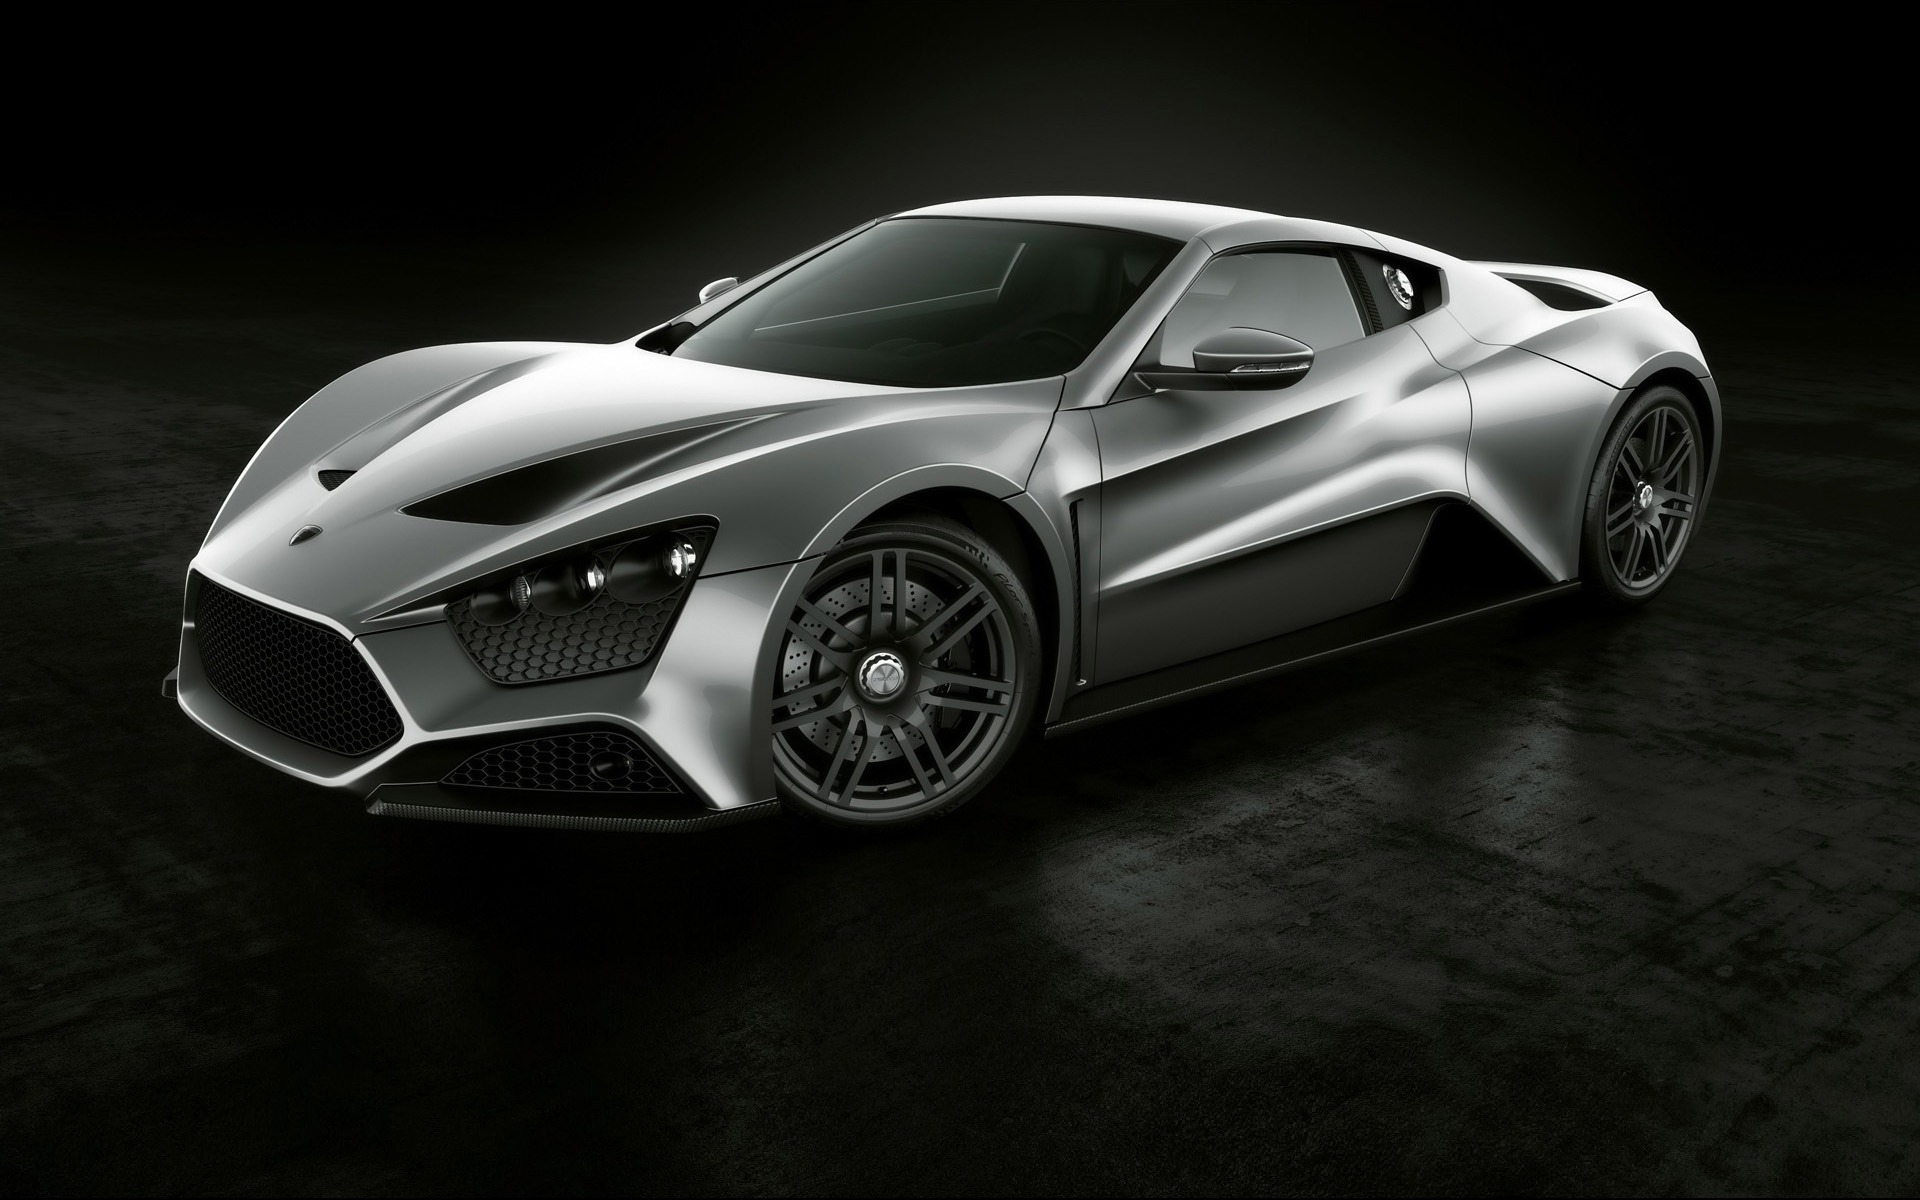 Zenvo ST Wallpaper Other Cars Wallpapers in jpg format for free 